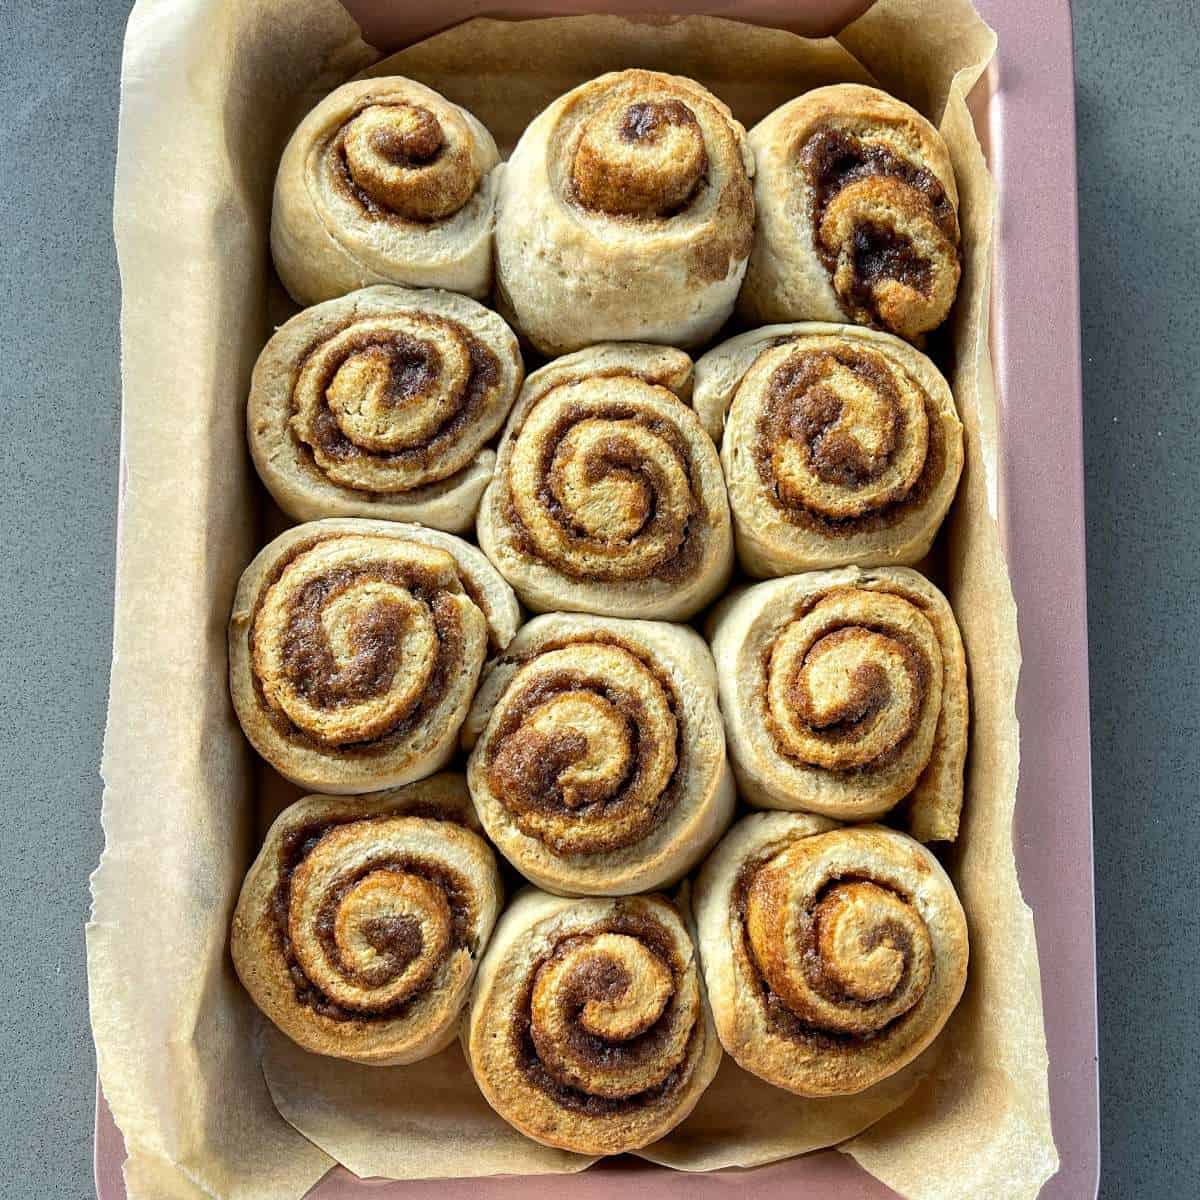 12 baked cinnamon pinwheels in a oven dish